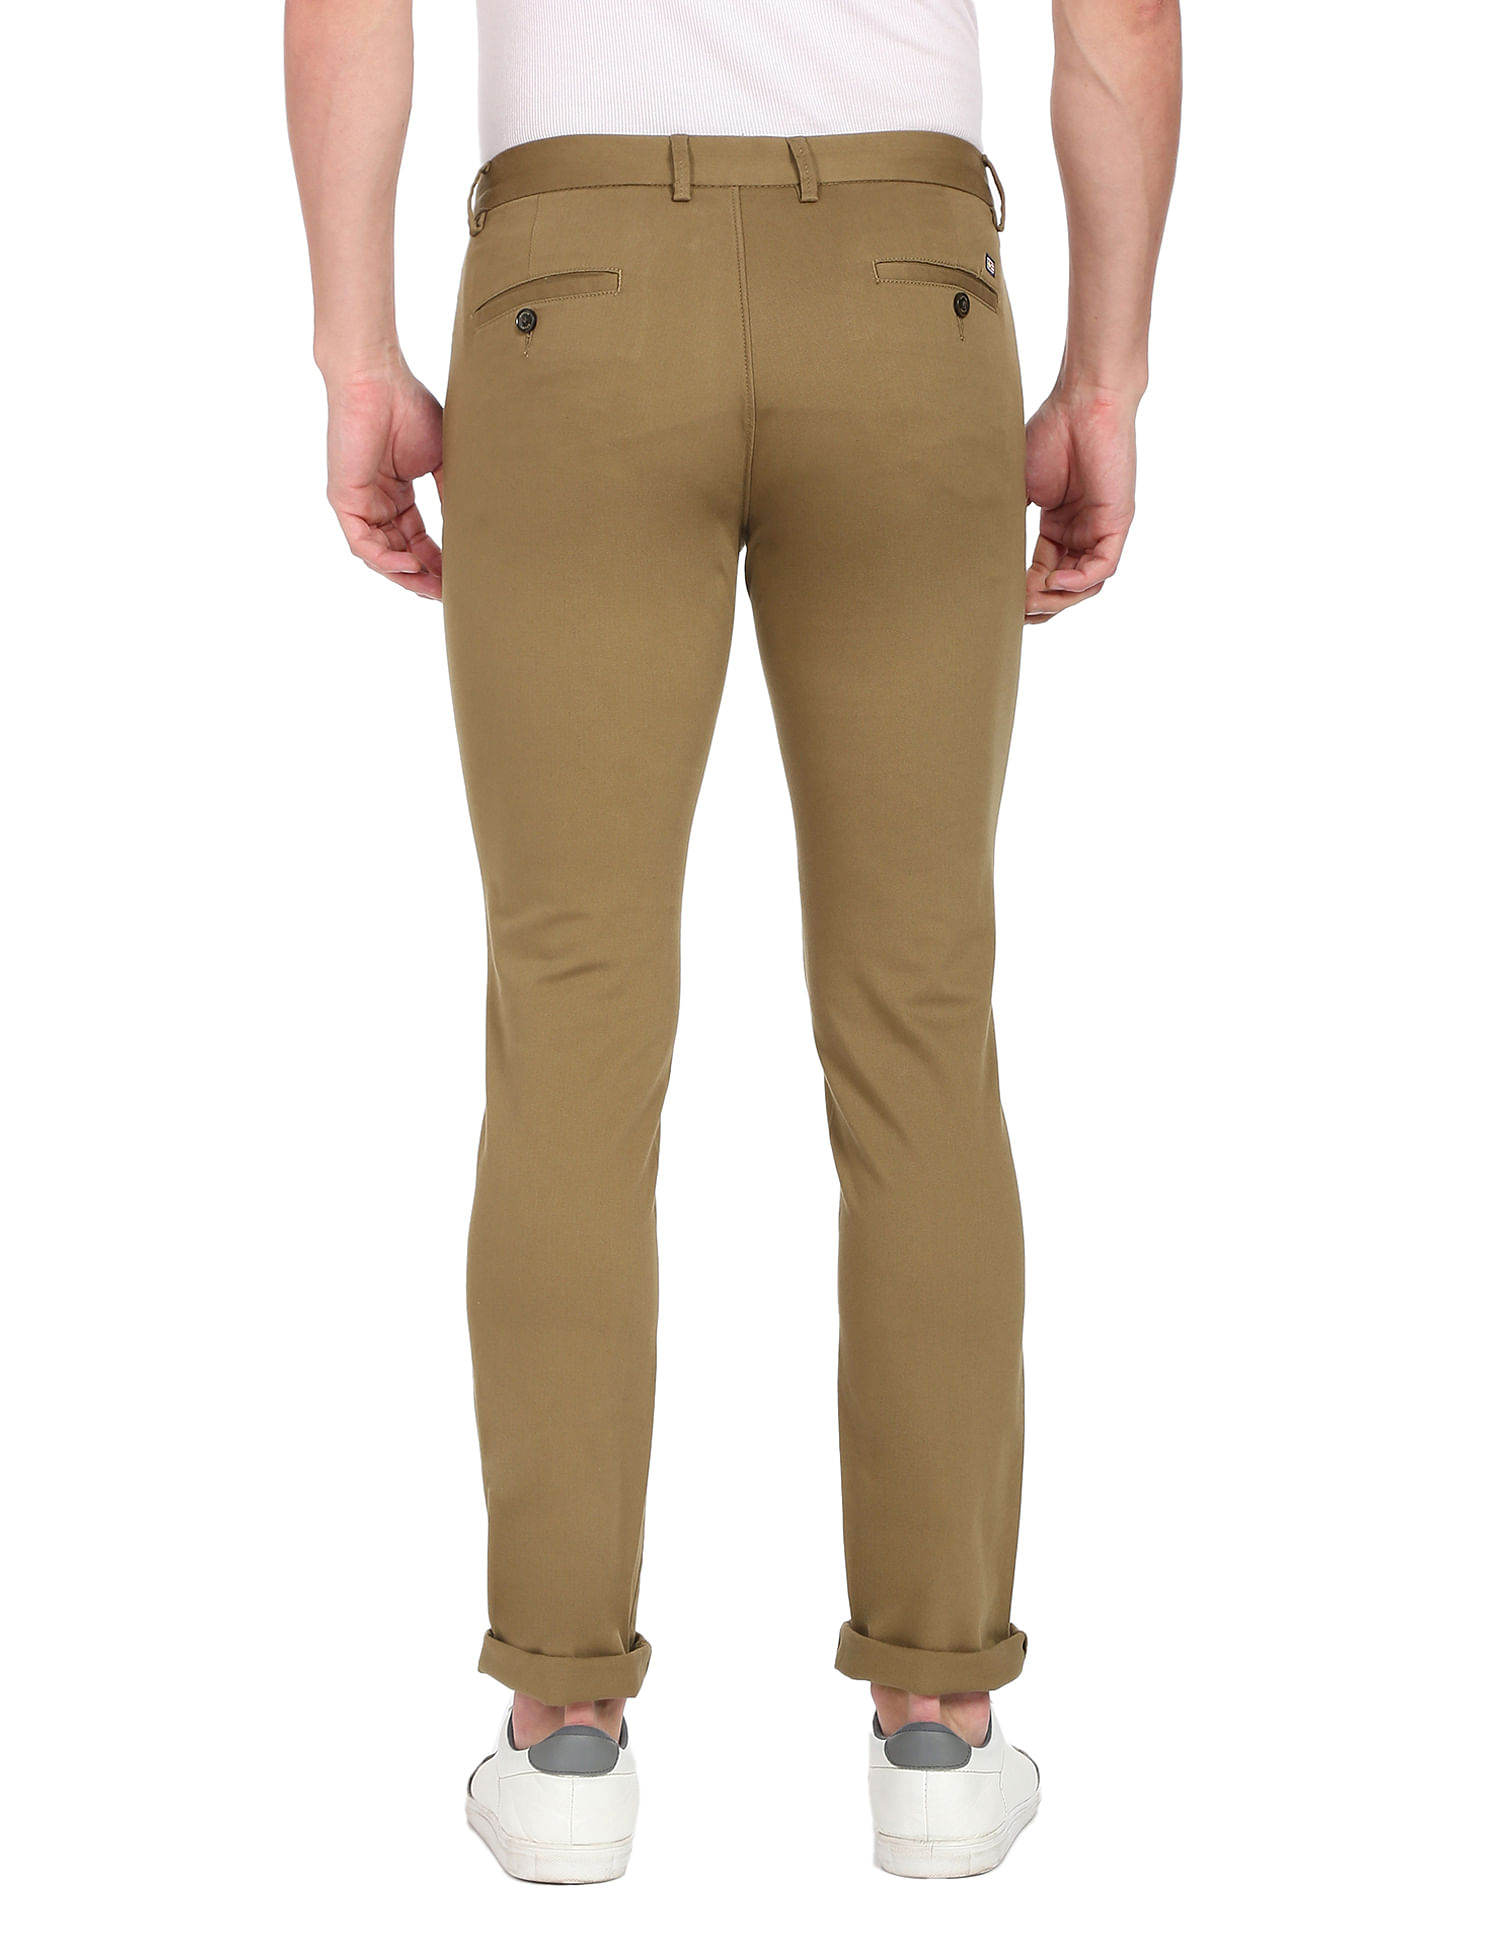 7 Color Regular Fit Mens Cotton Trouser at Rs 380 in Ludhiana | ID:  23238547733